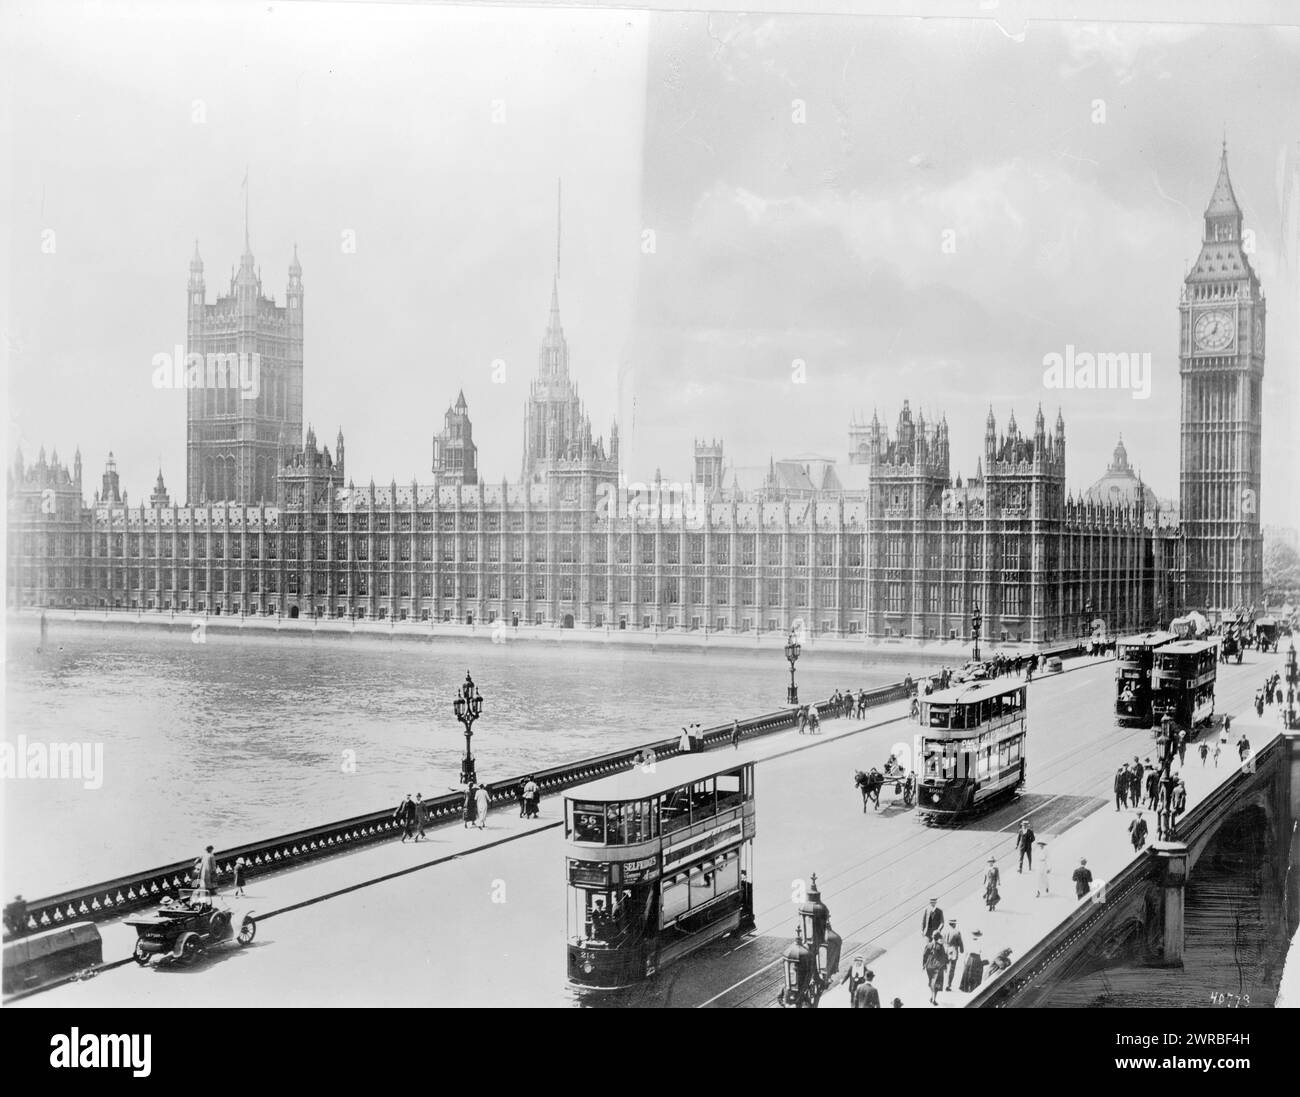 England - London - Parliament looking across bridge, Photo shows a view of the Westminster Bridge with double-decker buses or trolleys and pedestrians in the foreground, and the House of Parliament and Big Ben in the background., between 1915 and 1923, Great Britain., Parliament, Buildings, 1910-1930, Photographic prints, 1910-1930., Photographic prints, 1910-1930, 1 photographic print Stock Photo